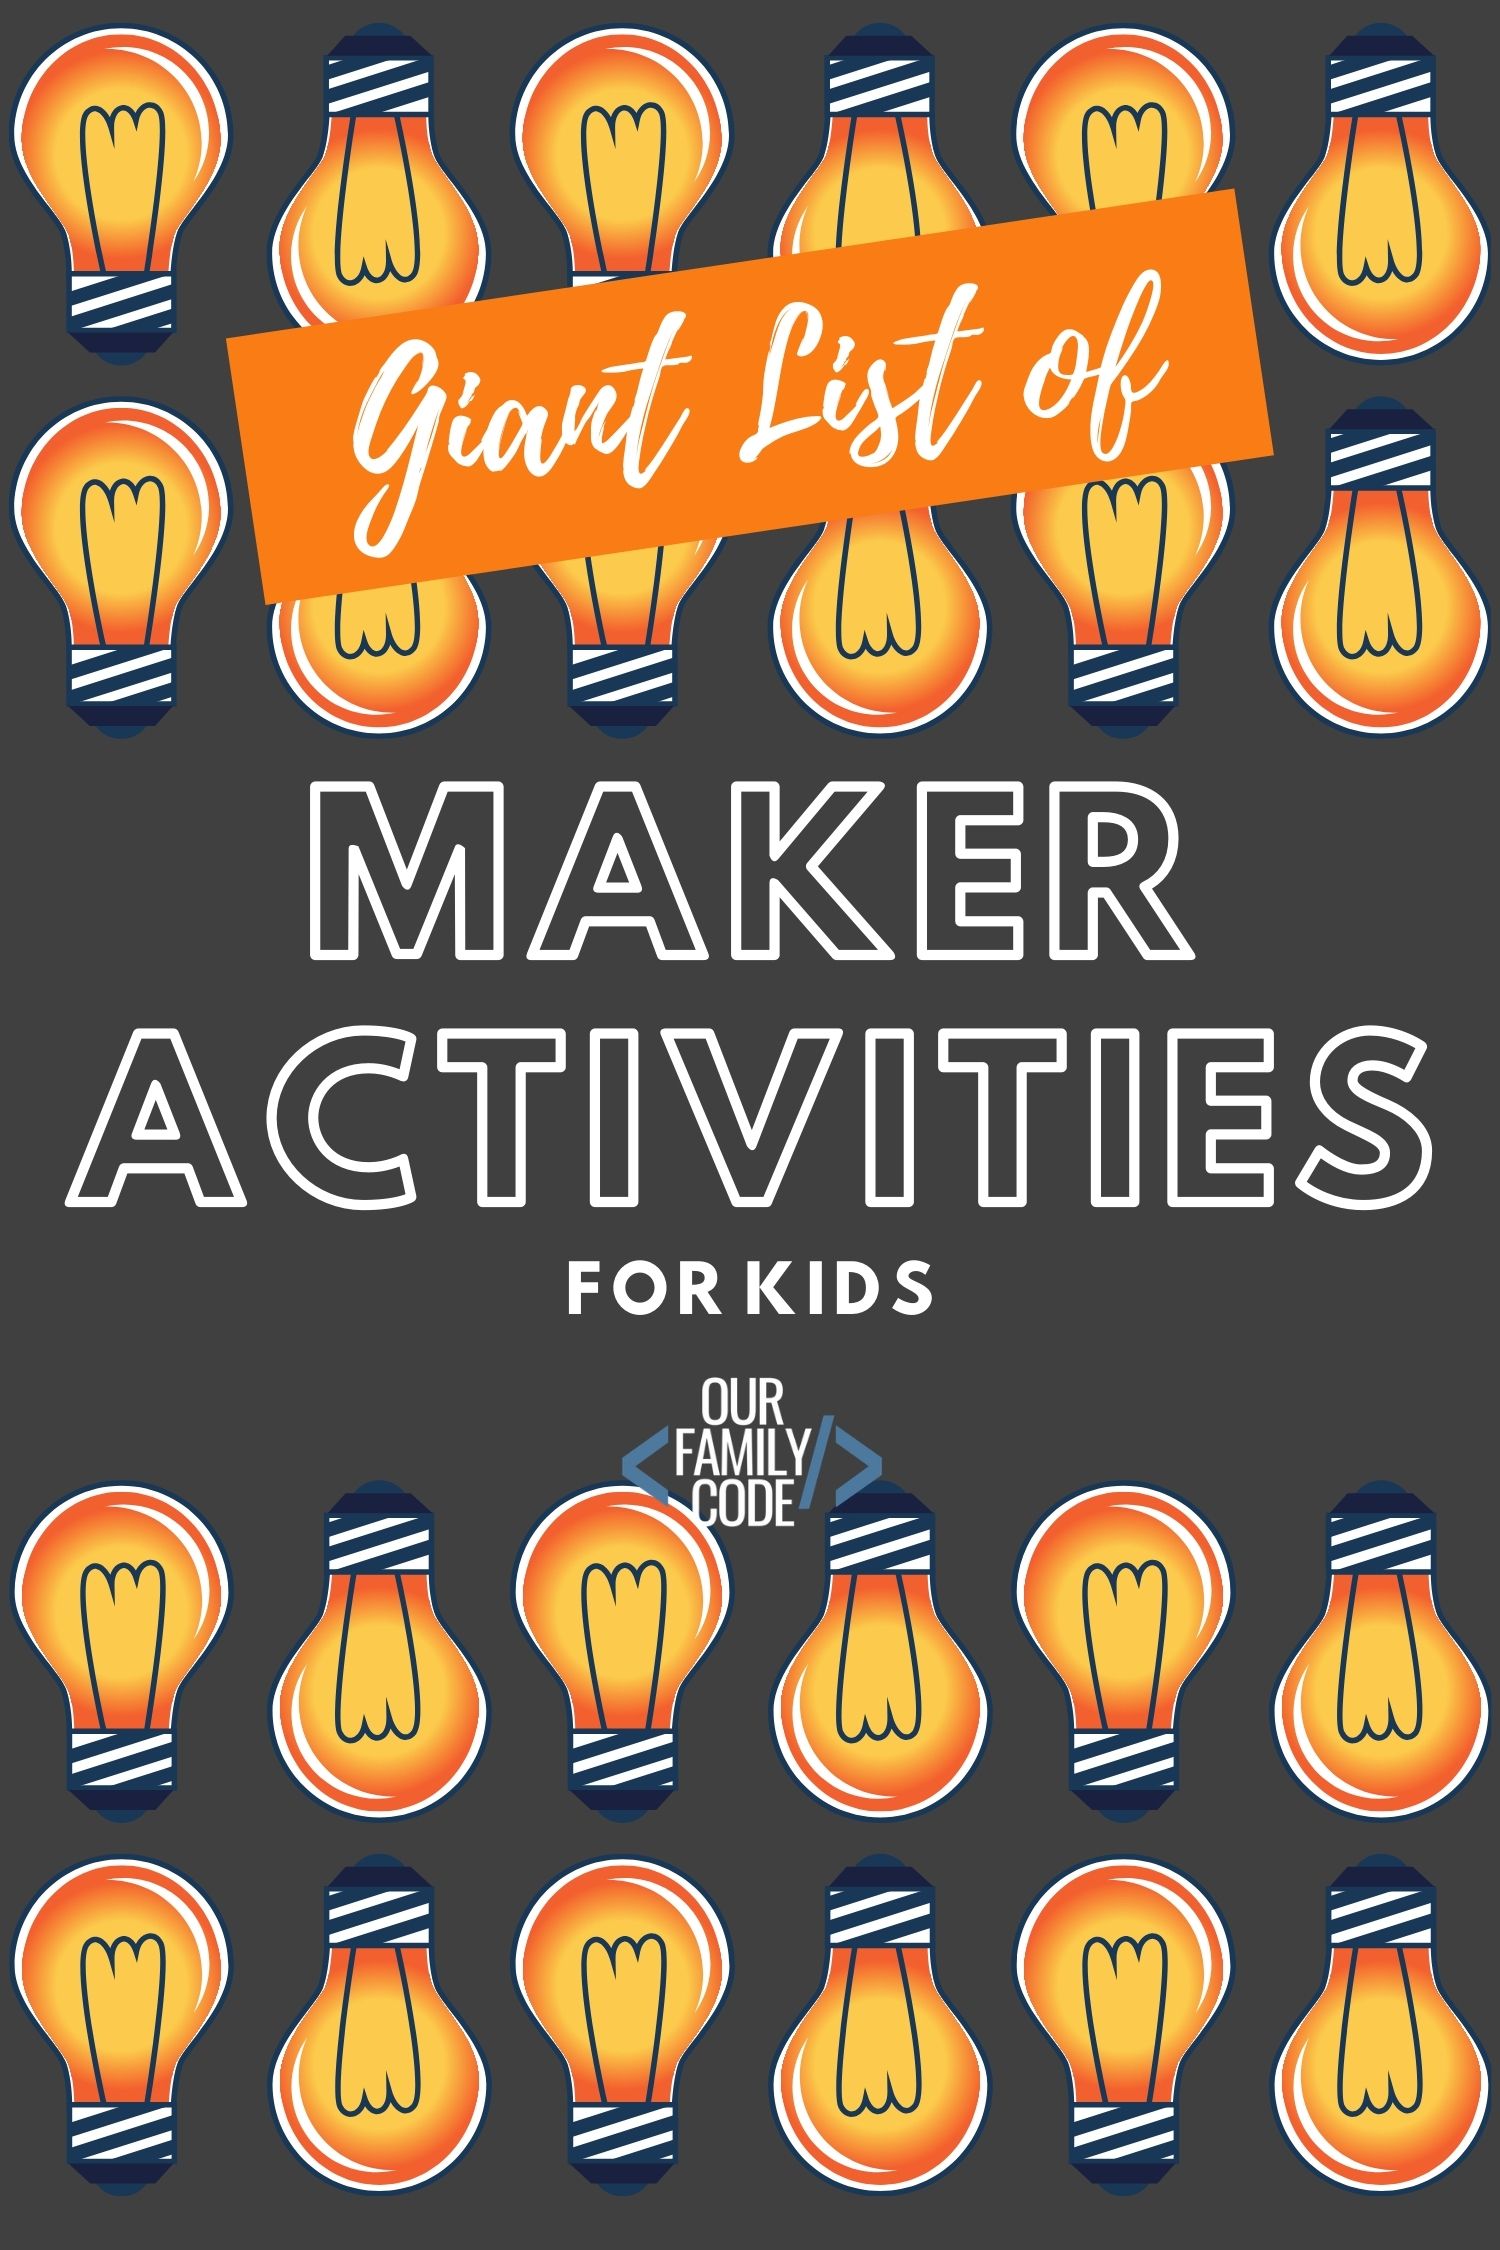 A picture of lightbulbs over a gray background with a giant list of Maker activities for kids printed in text.